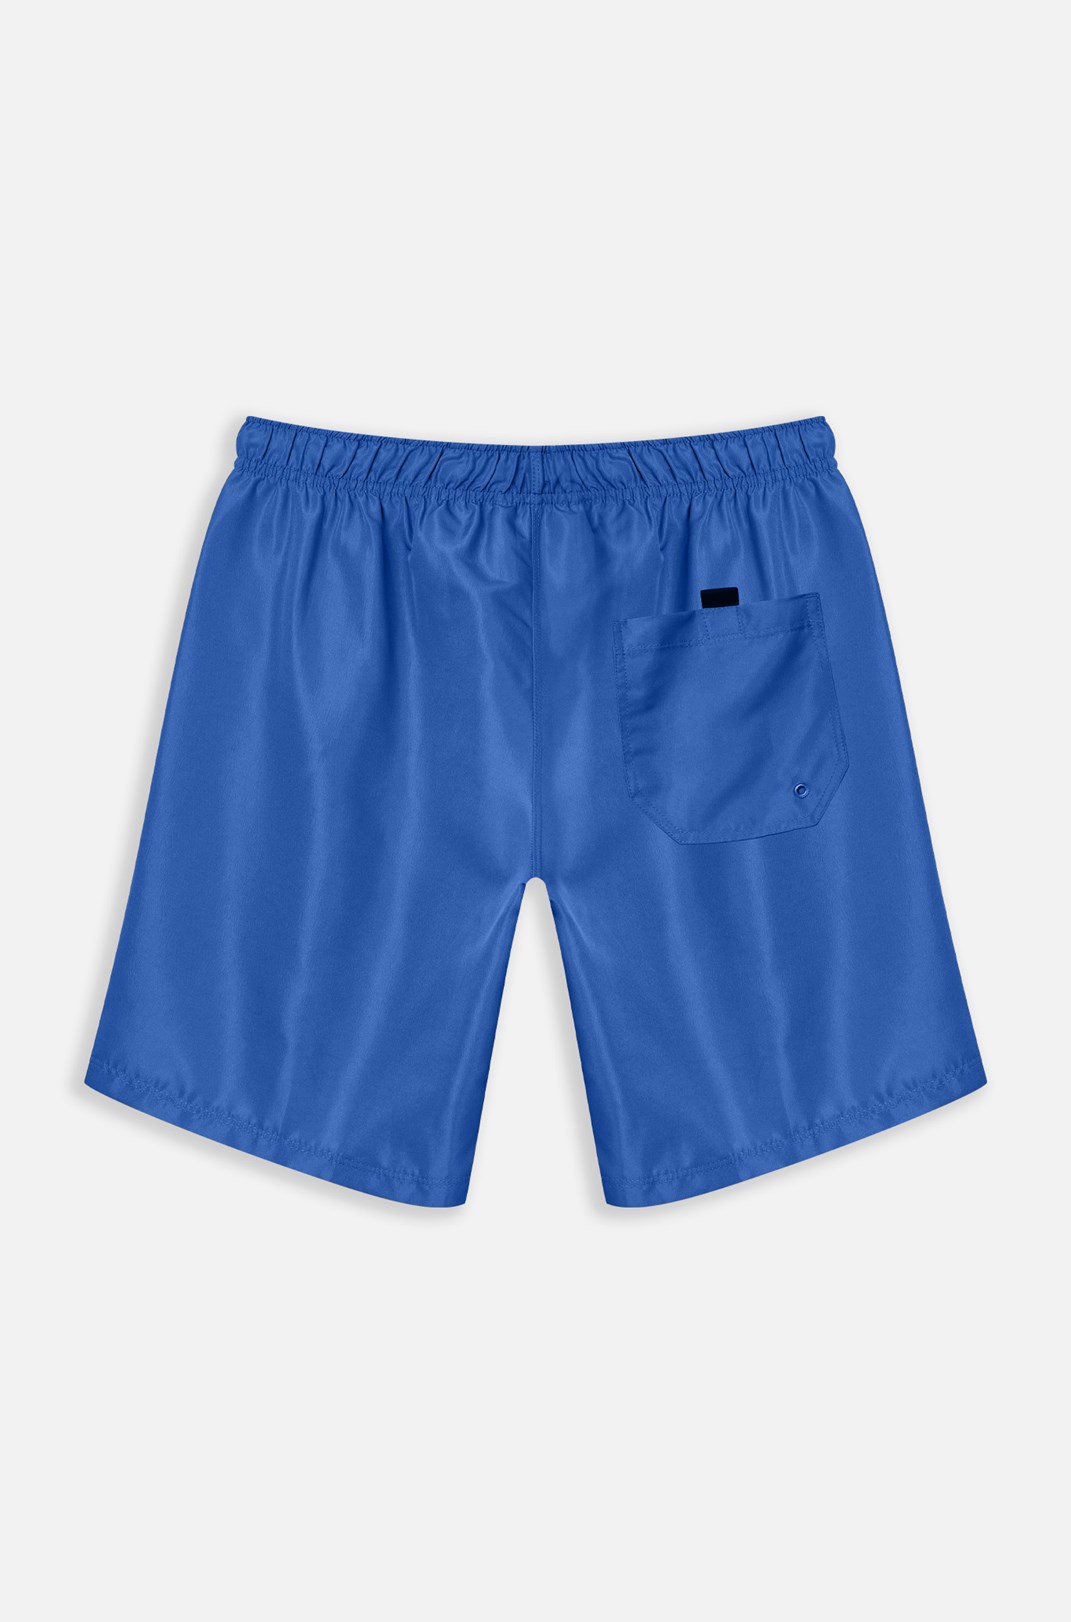 Shorts 7inches Approve Workwear Azul